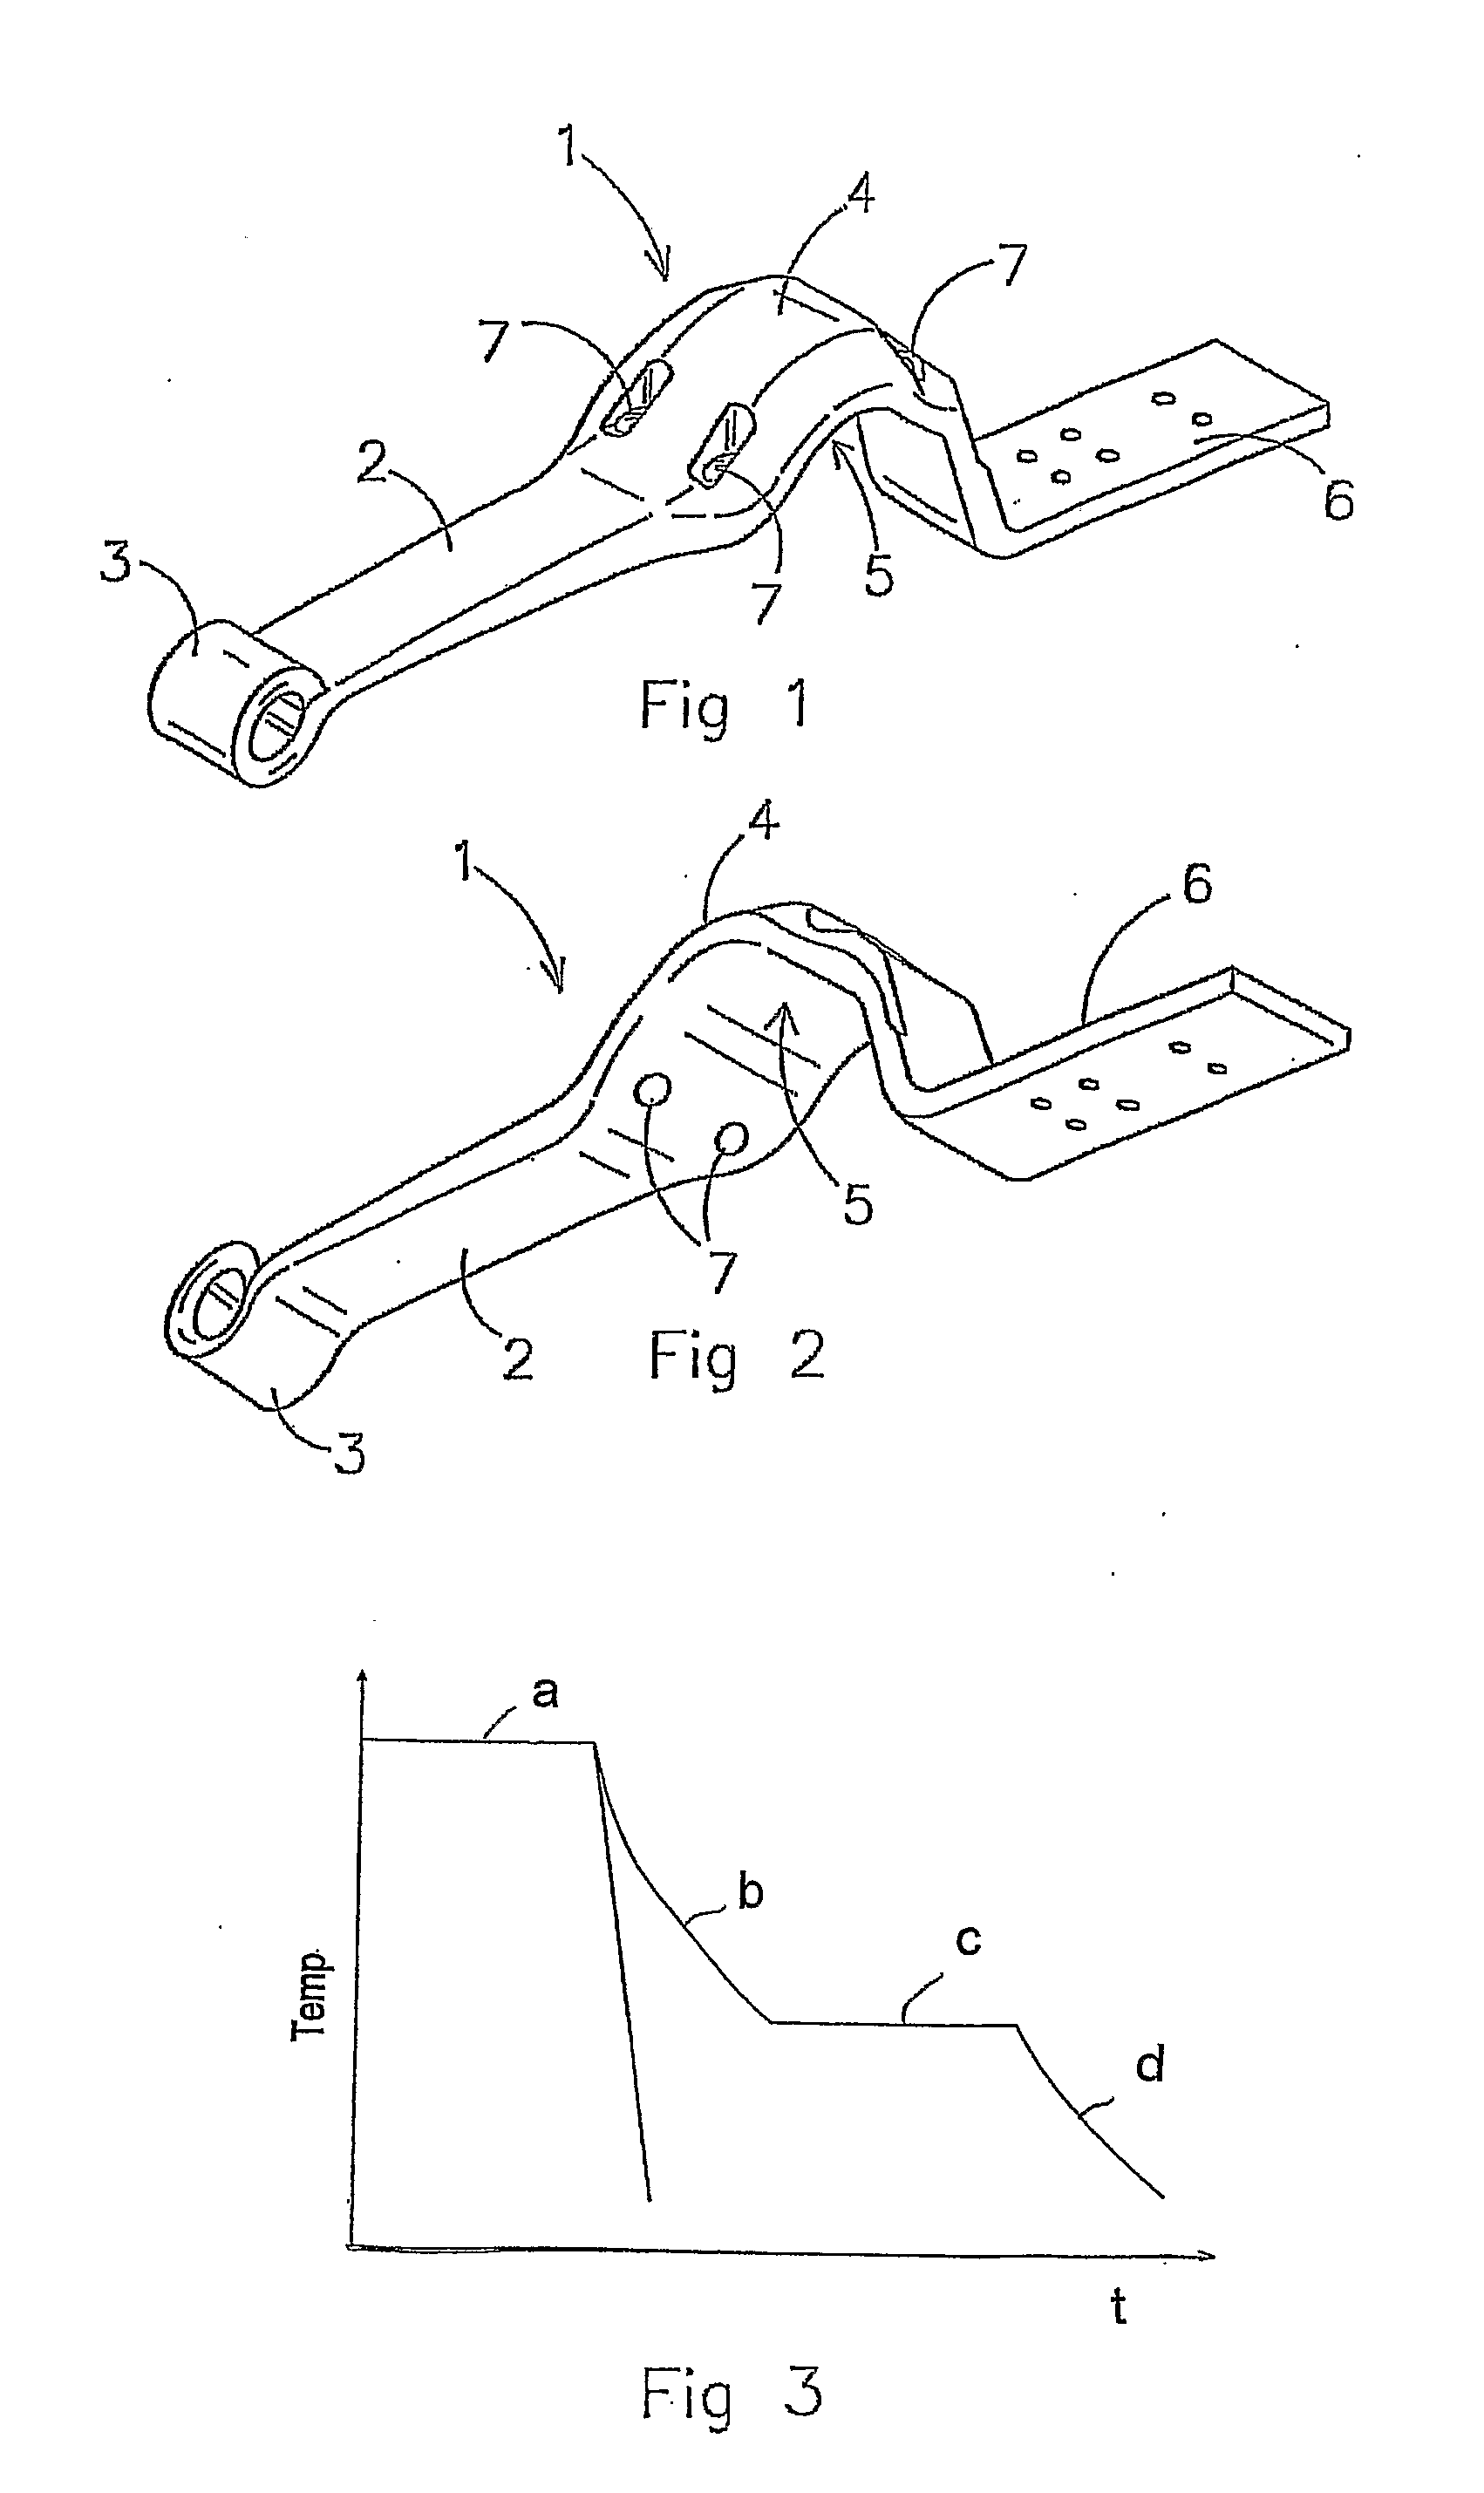 Hardening of flexible trailing arms